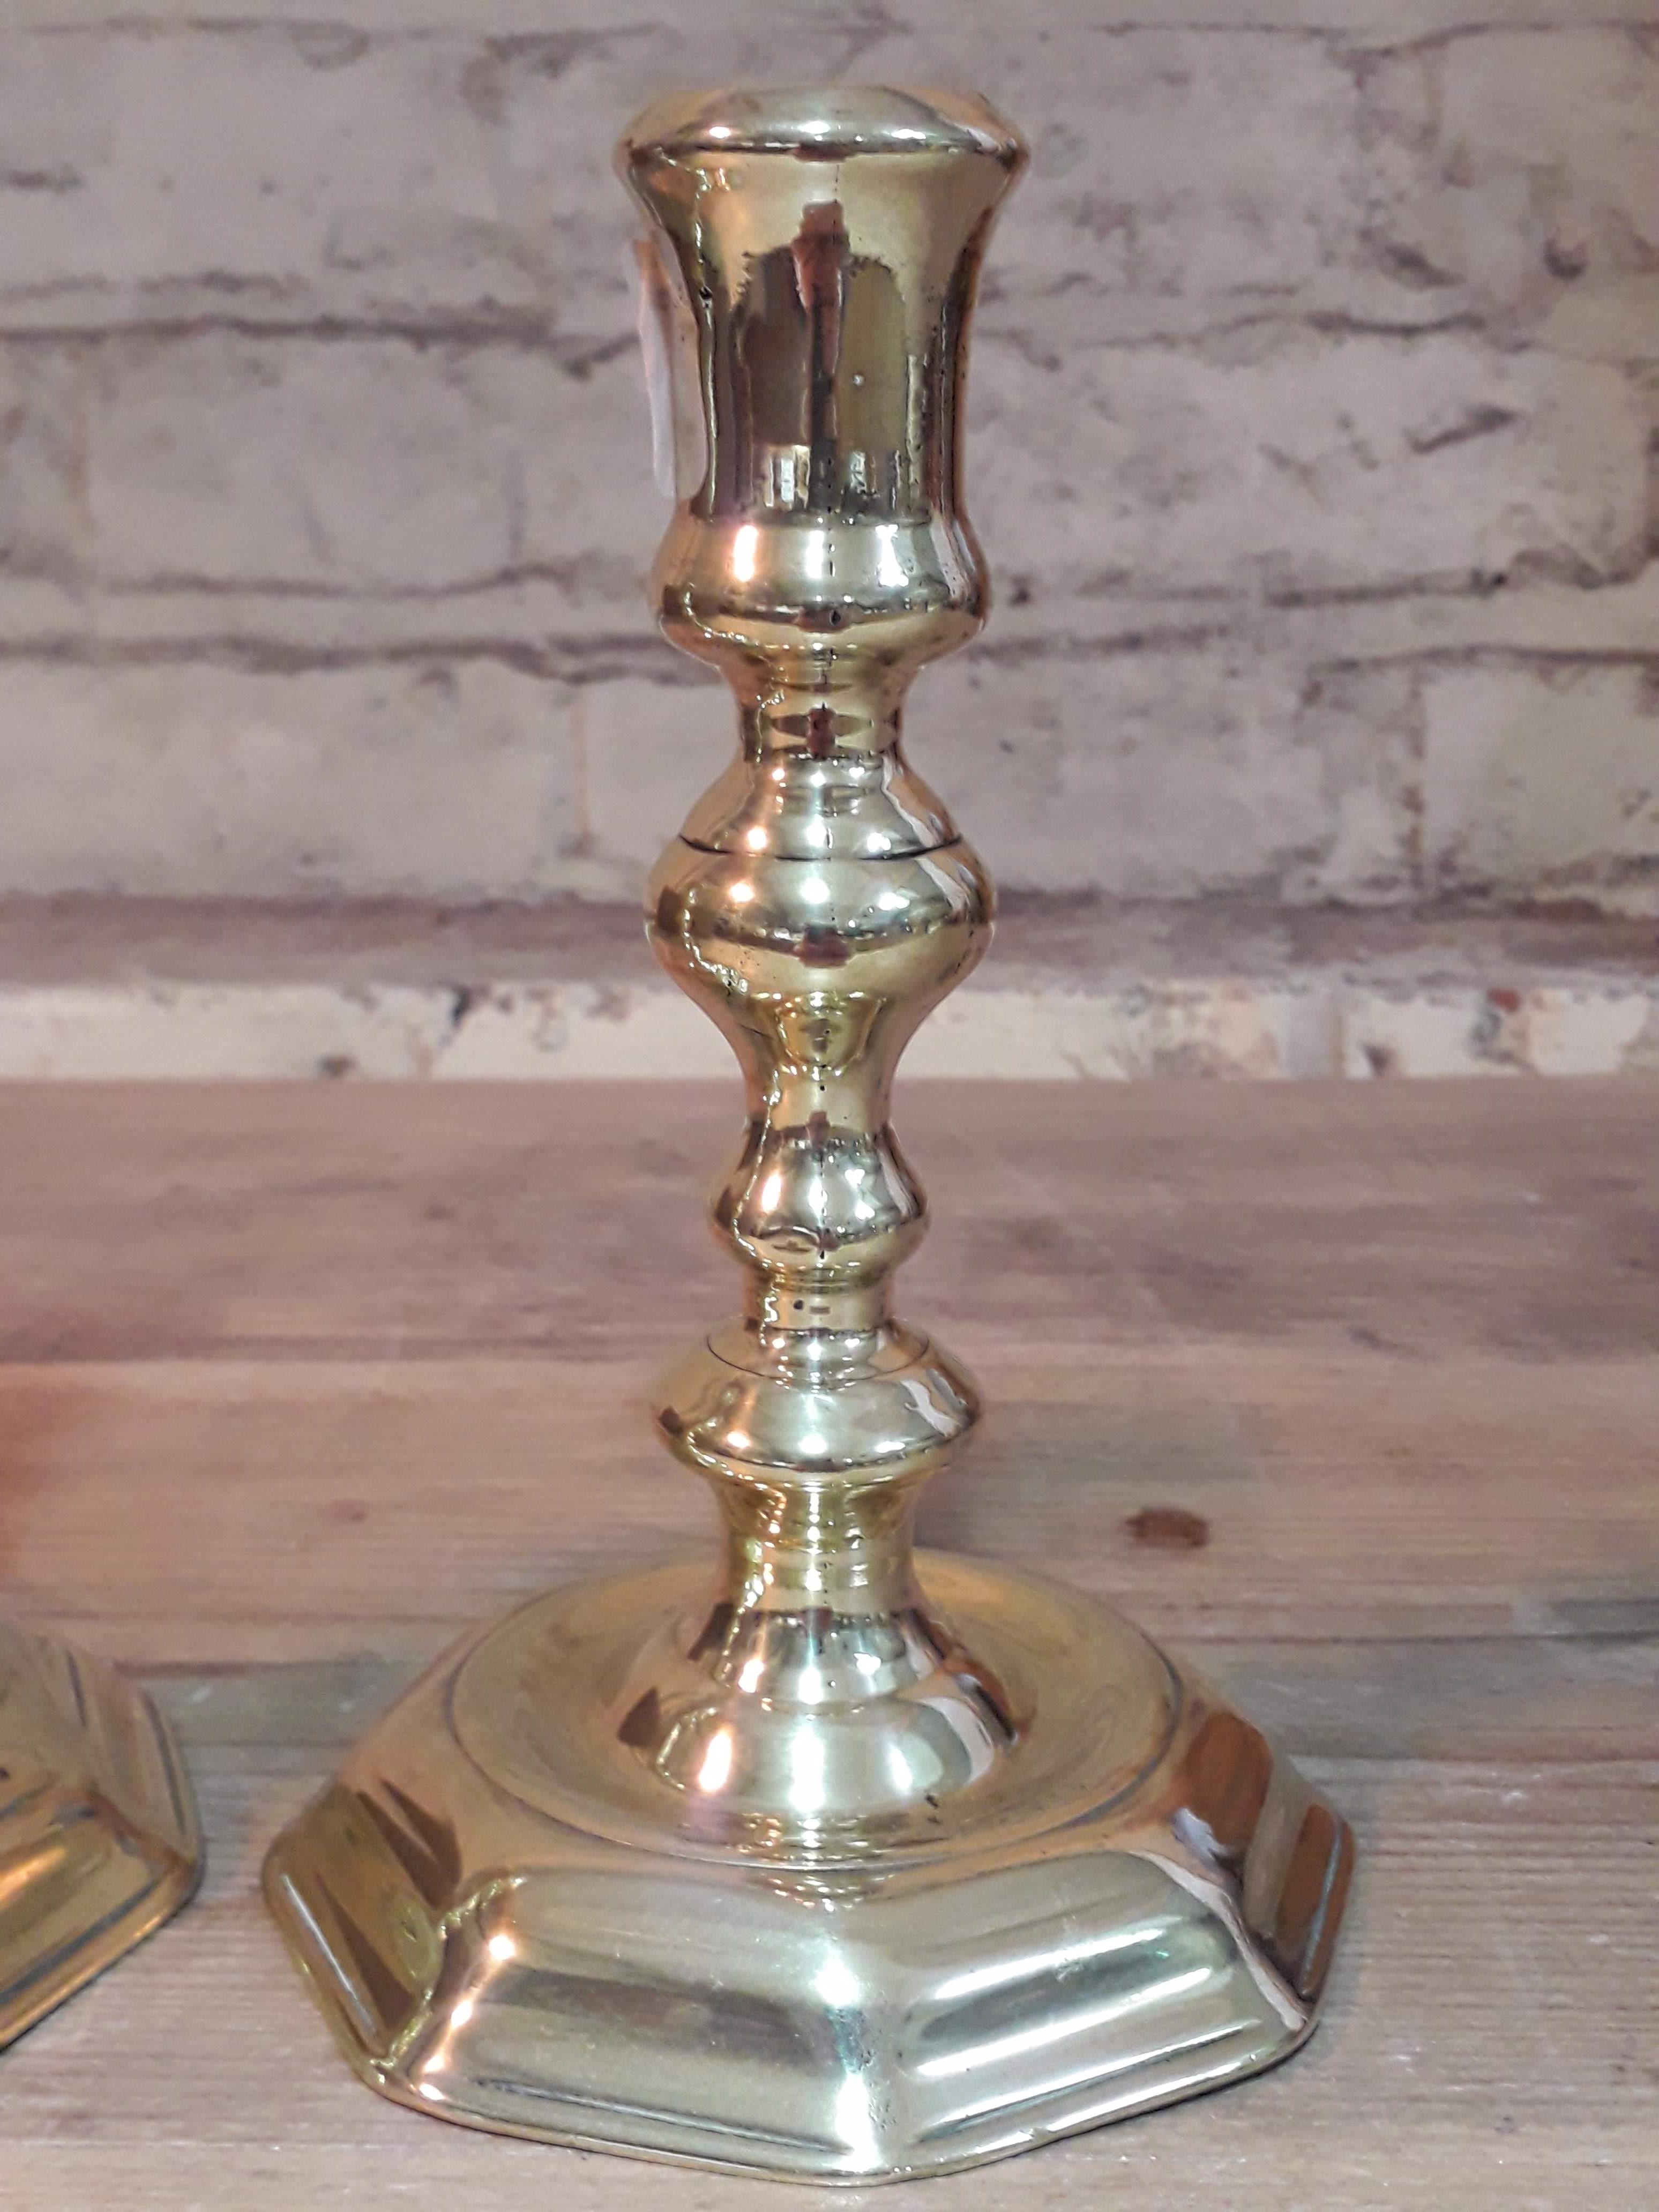 A pair brass candlesticks, heights 17cm. Condition: dents to both sticks. - Image 5 of 5